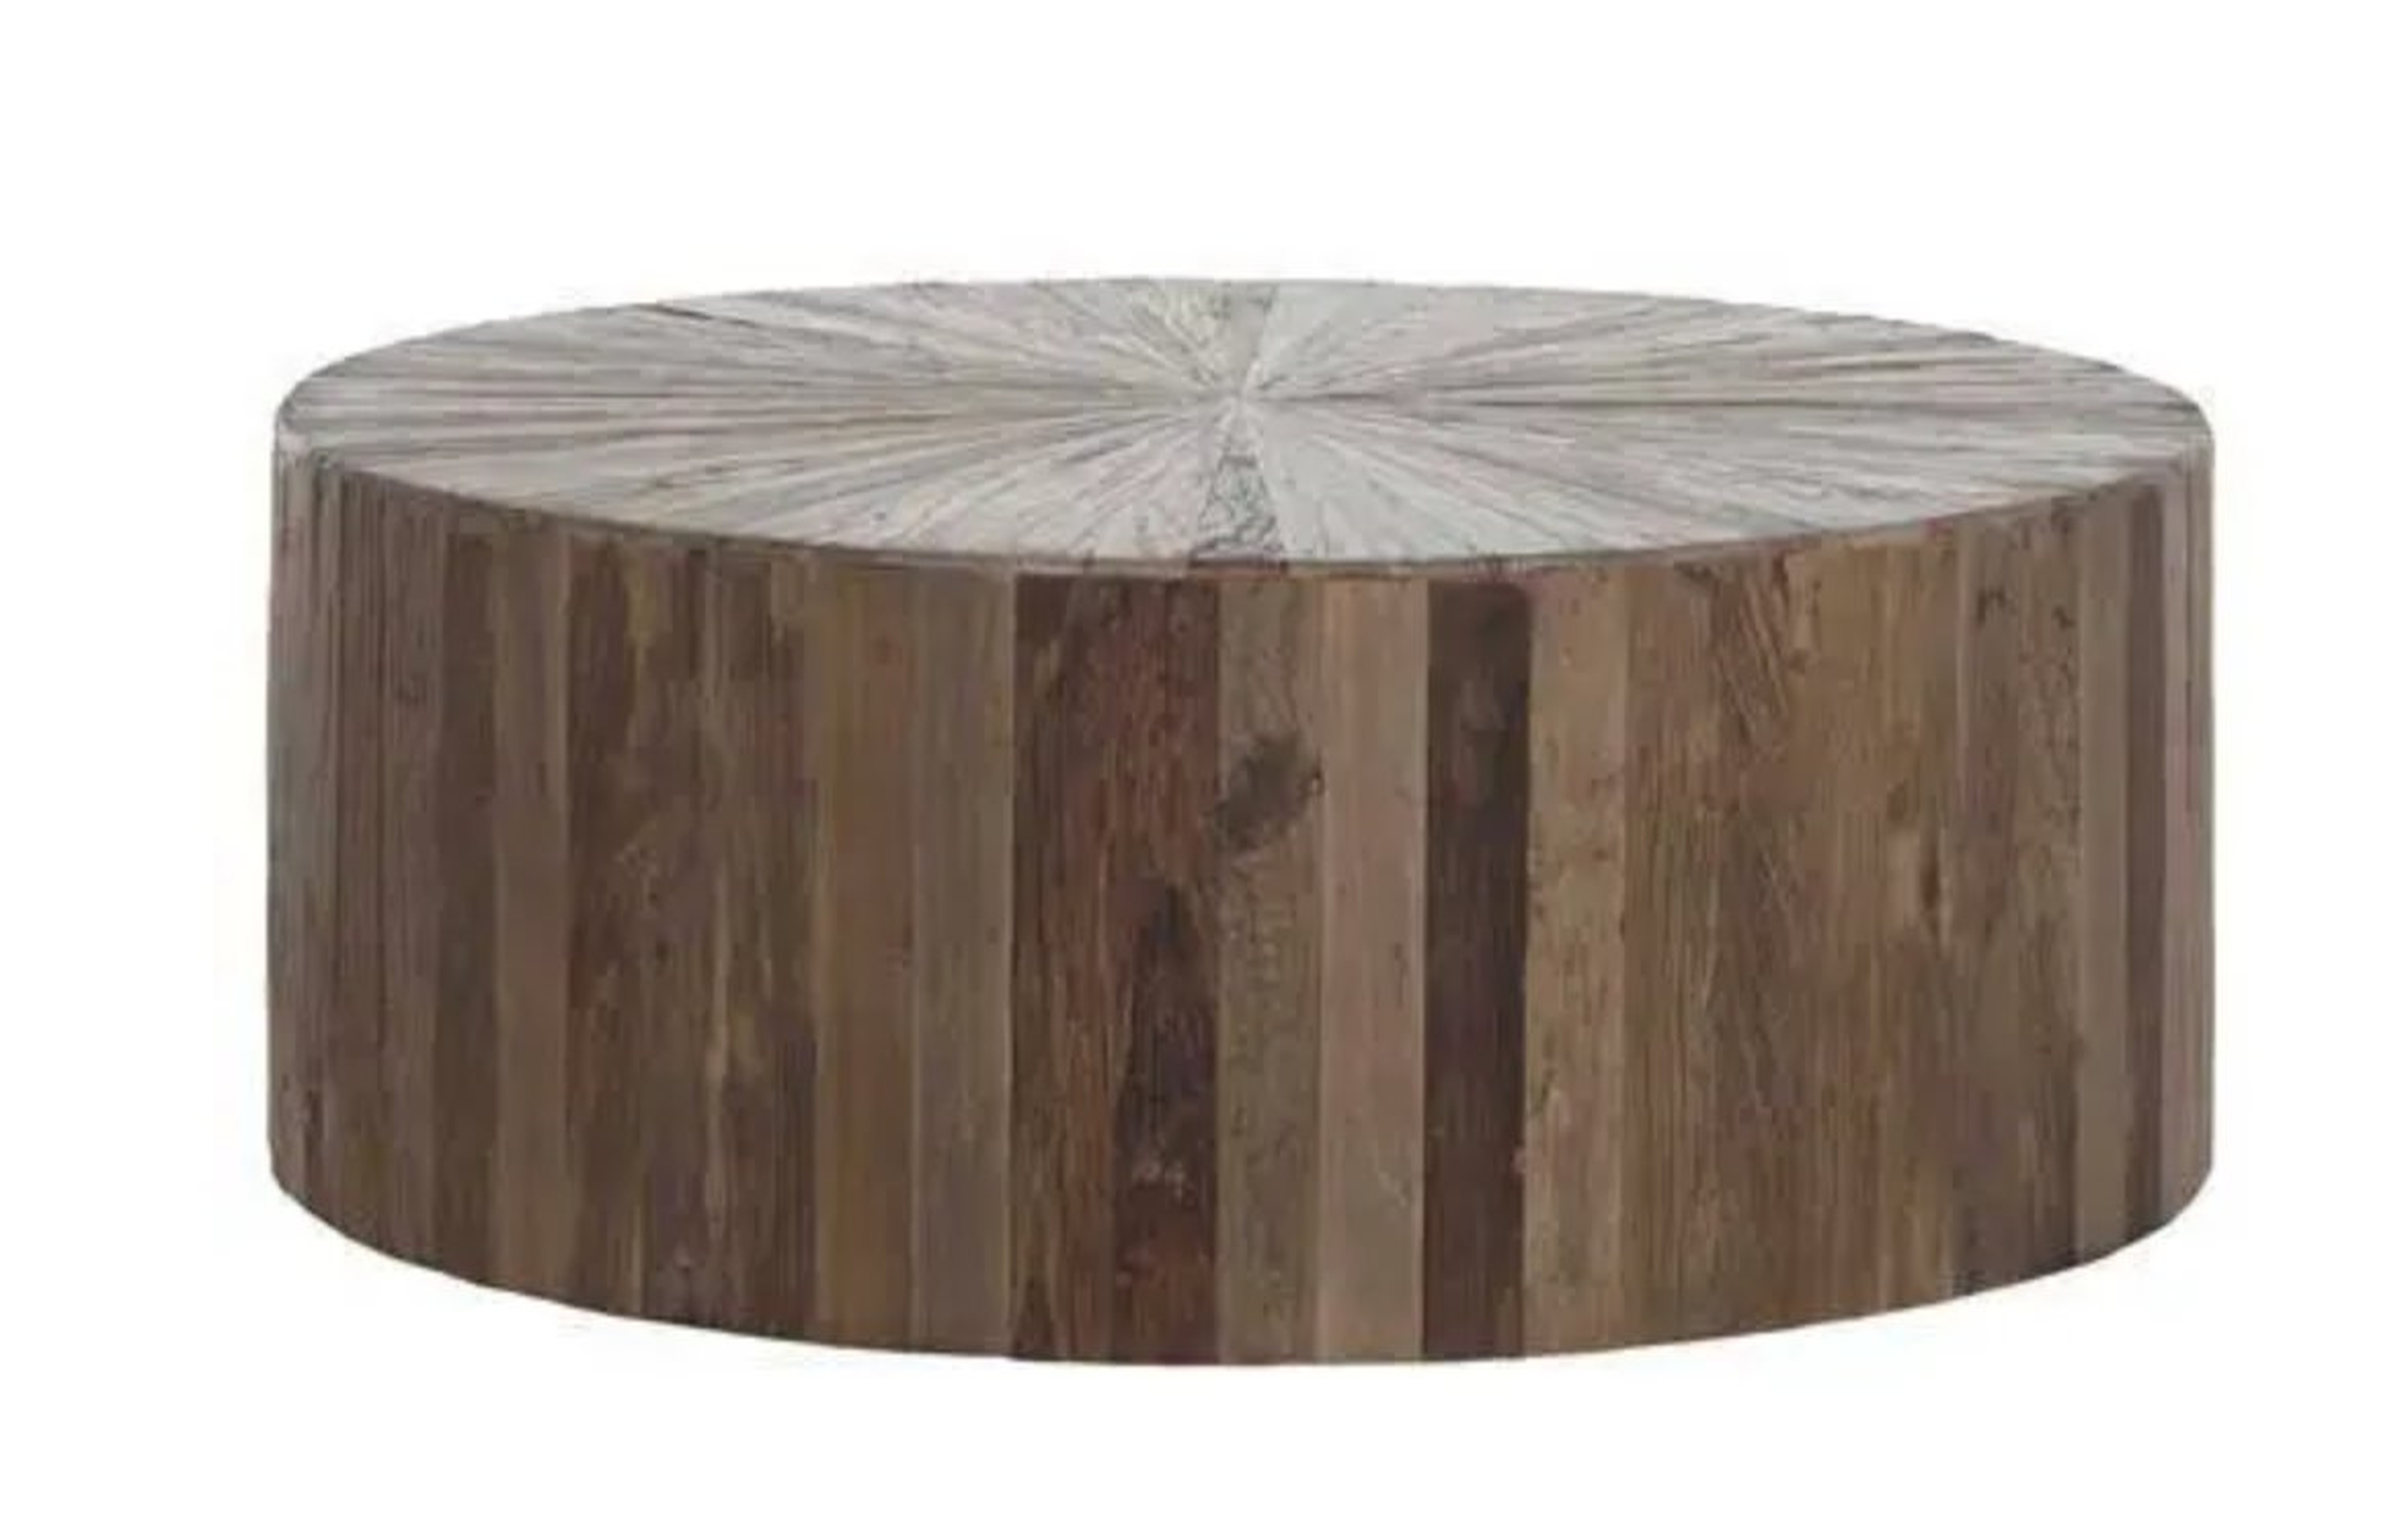 Cyrano Reclaimed Wood Round Drum Modern Eco Coffee Table - Kathy Kuo Home